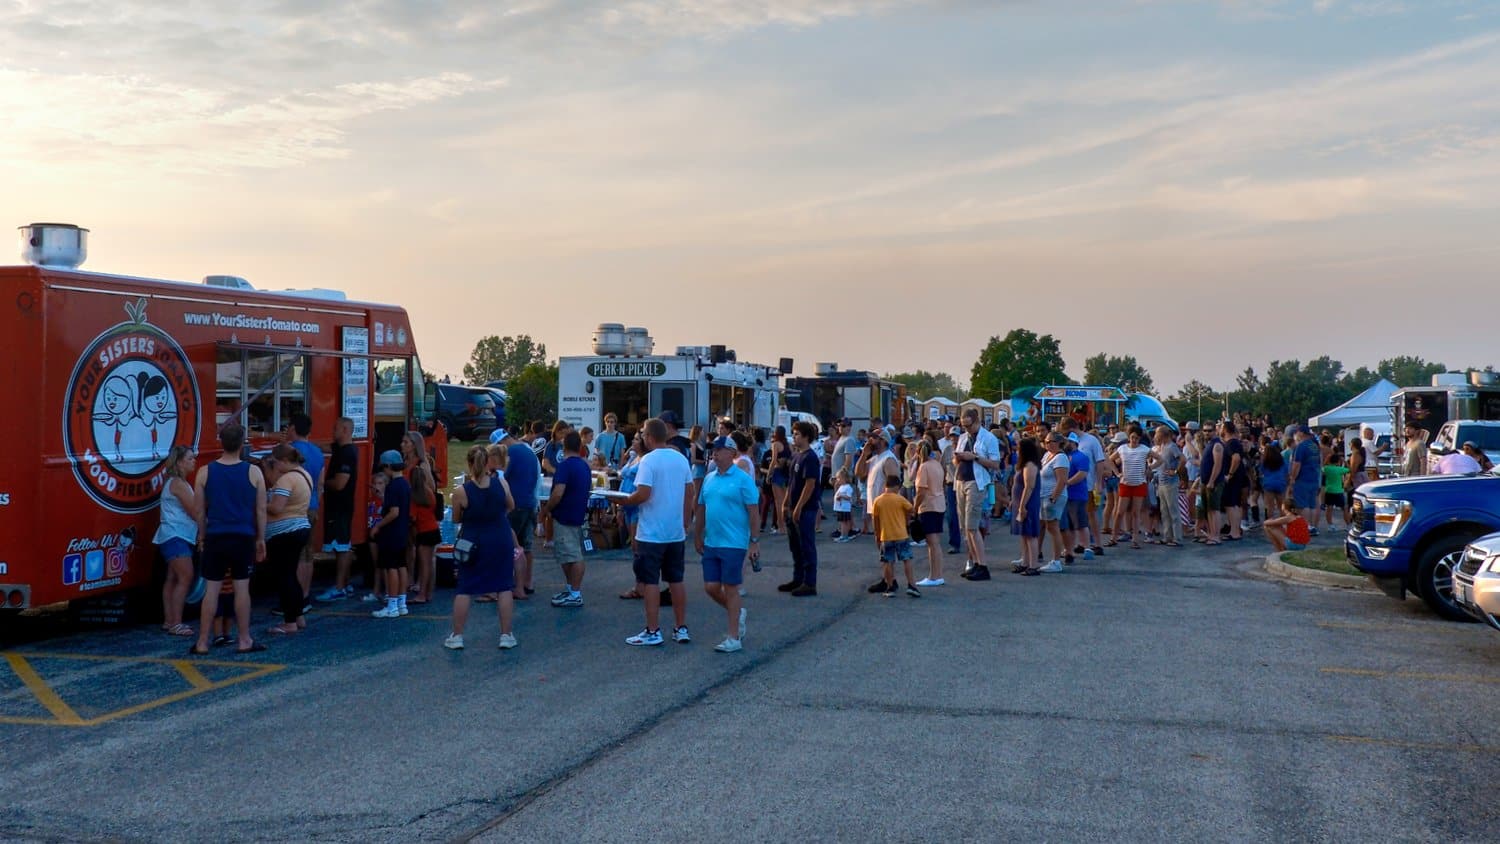 Lines at the food trucks.